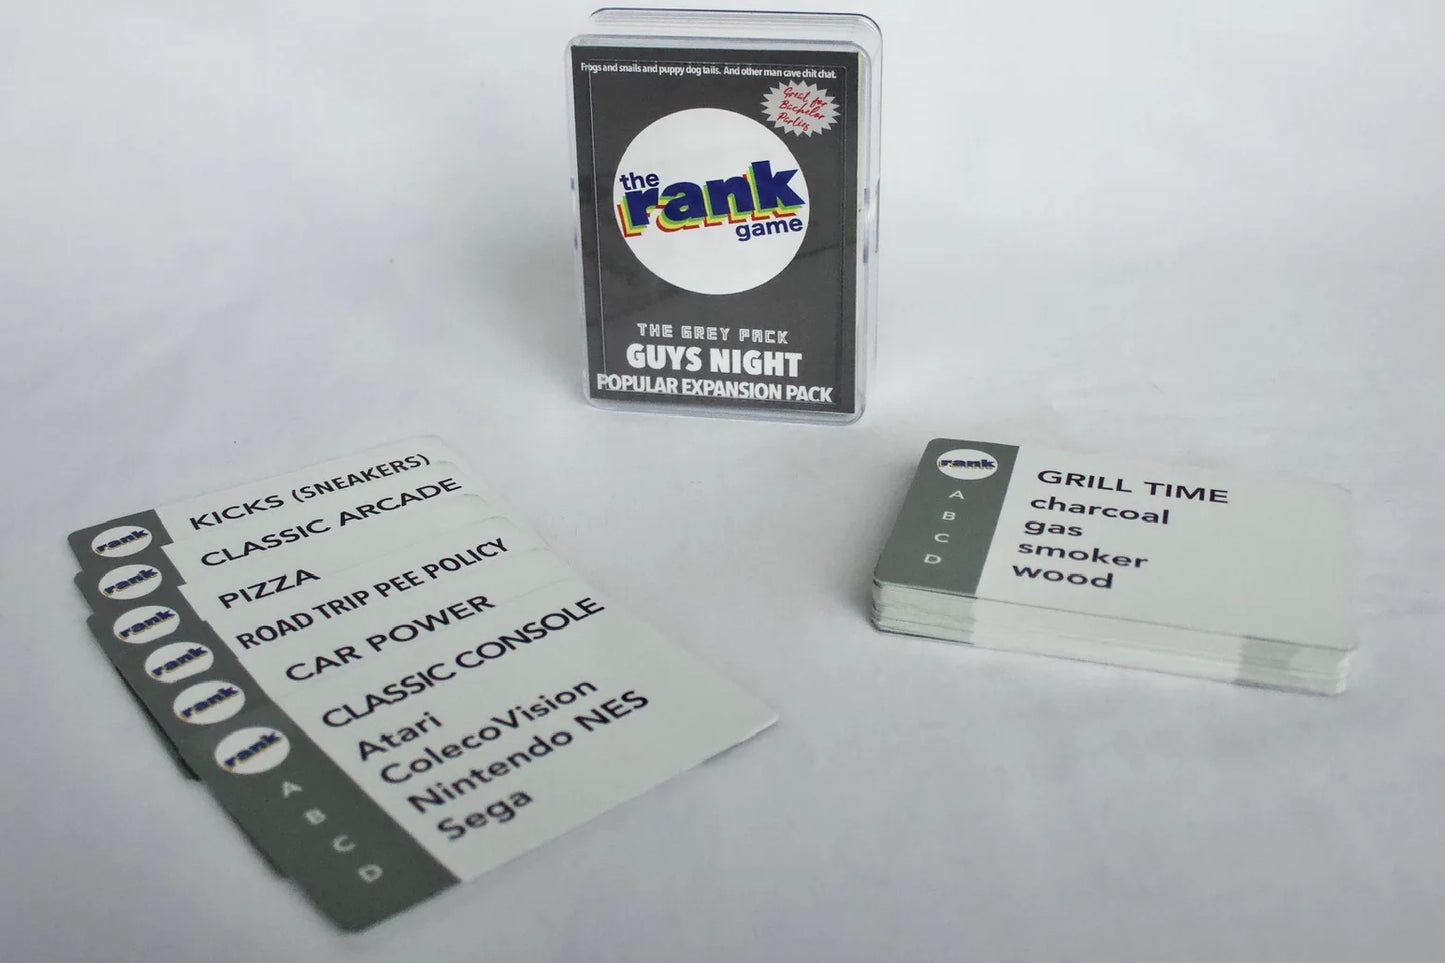 The Rank Game Expansion & Standalone Pack: Guys Night